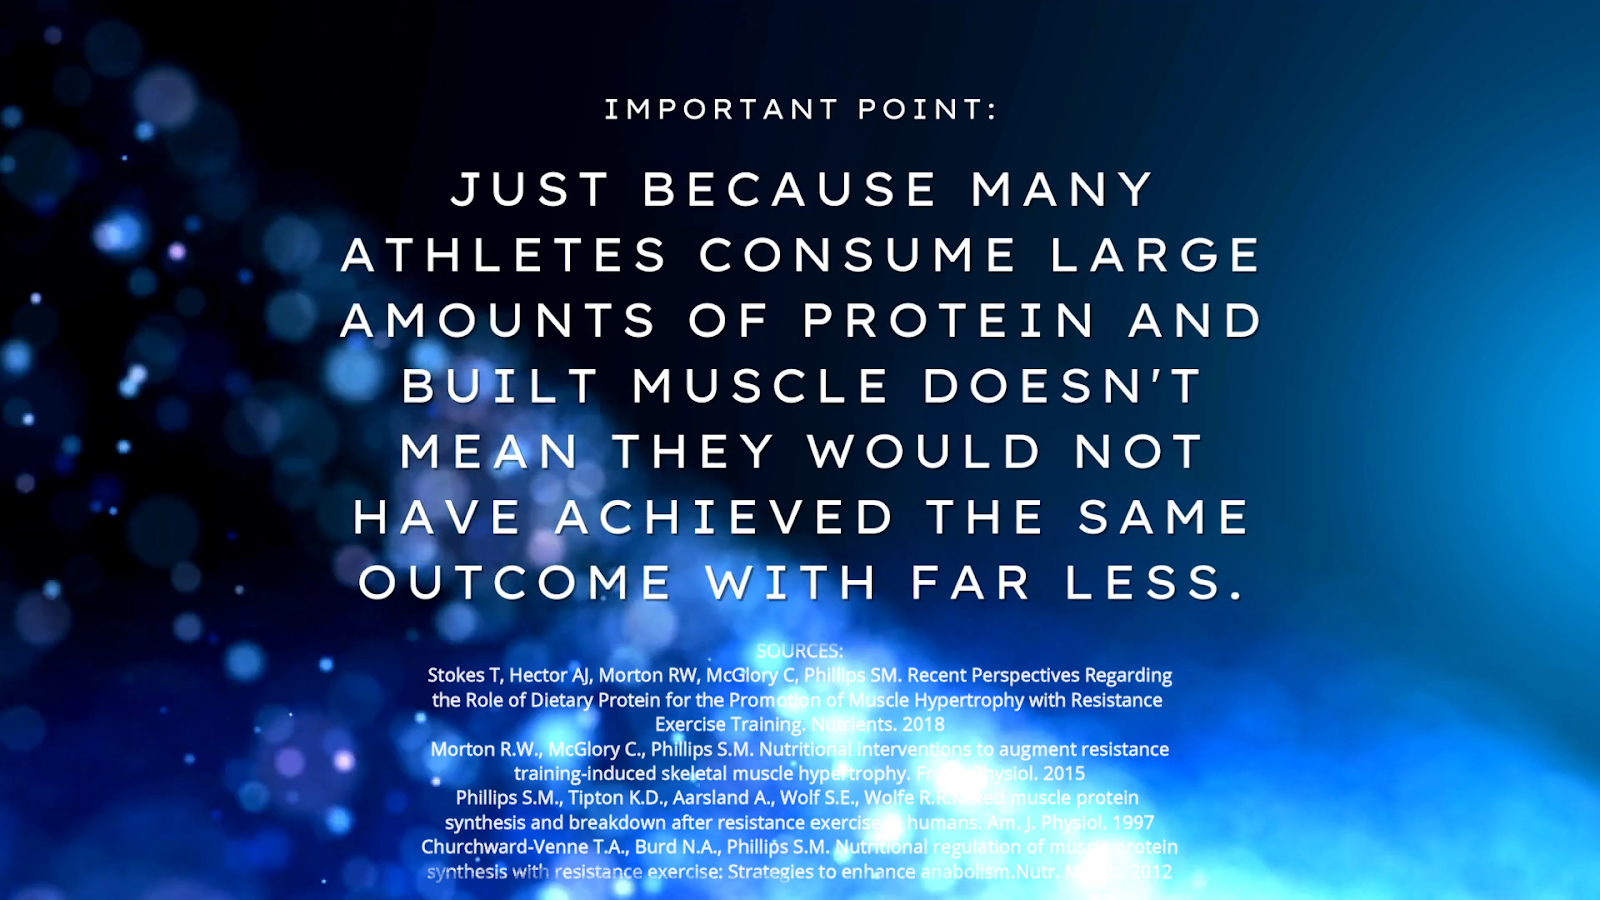 You can achieve amazing results without having an extremely high protein consumption